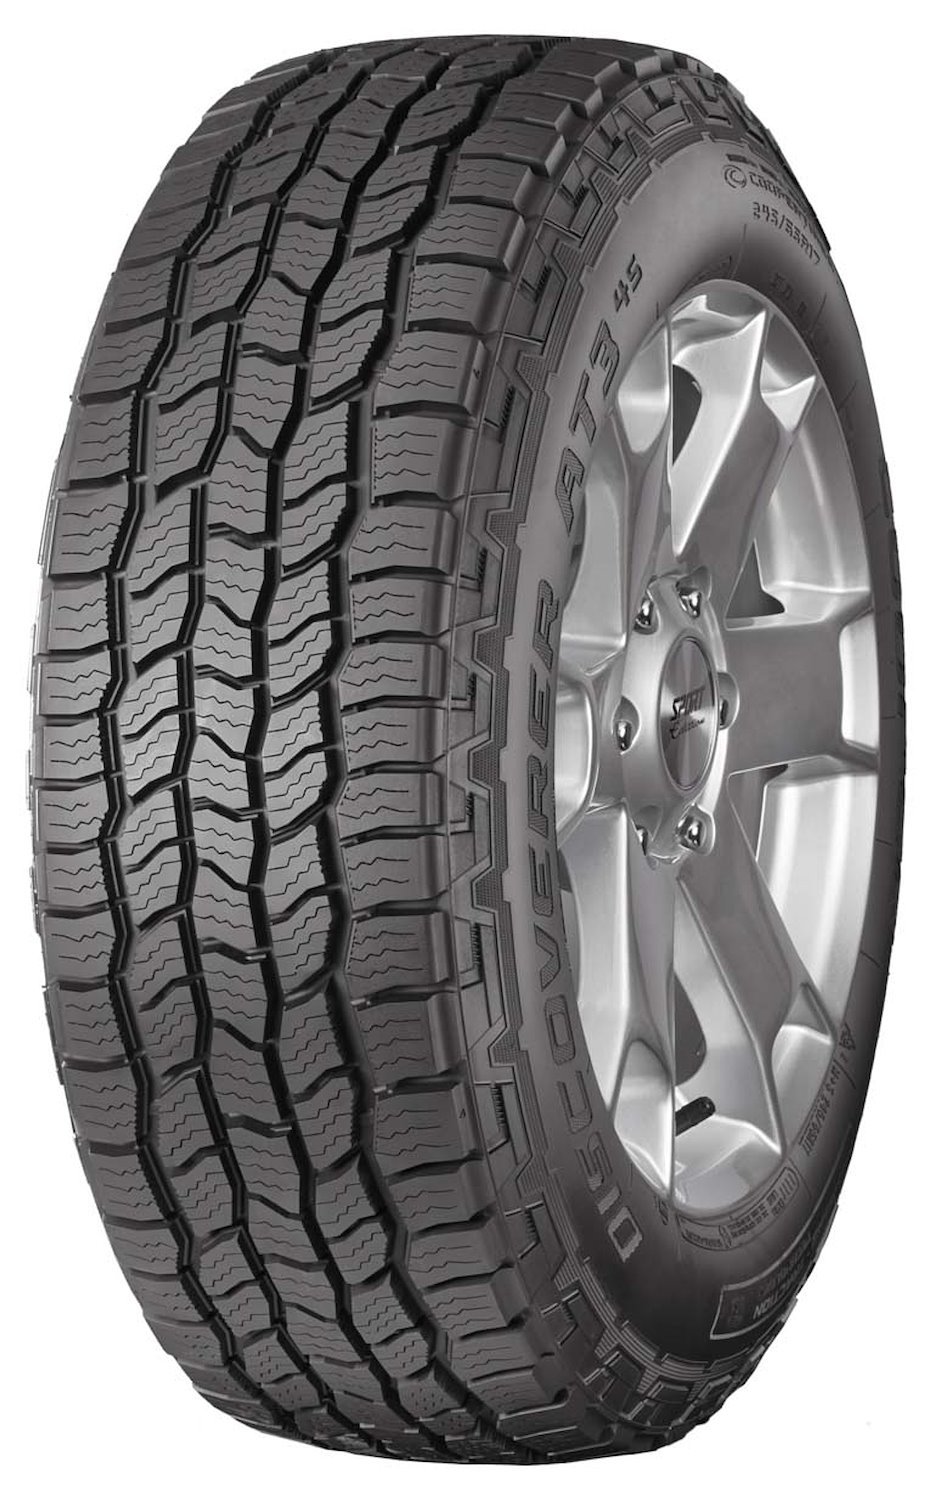 Discoverer AT3 4S All-Terrain Tire, P285/70R17